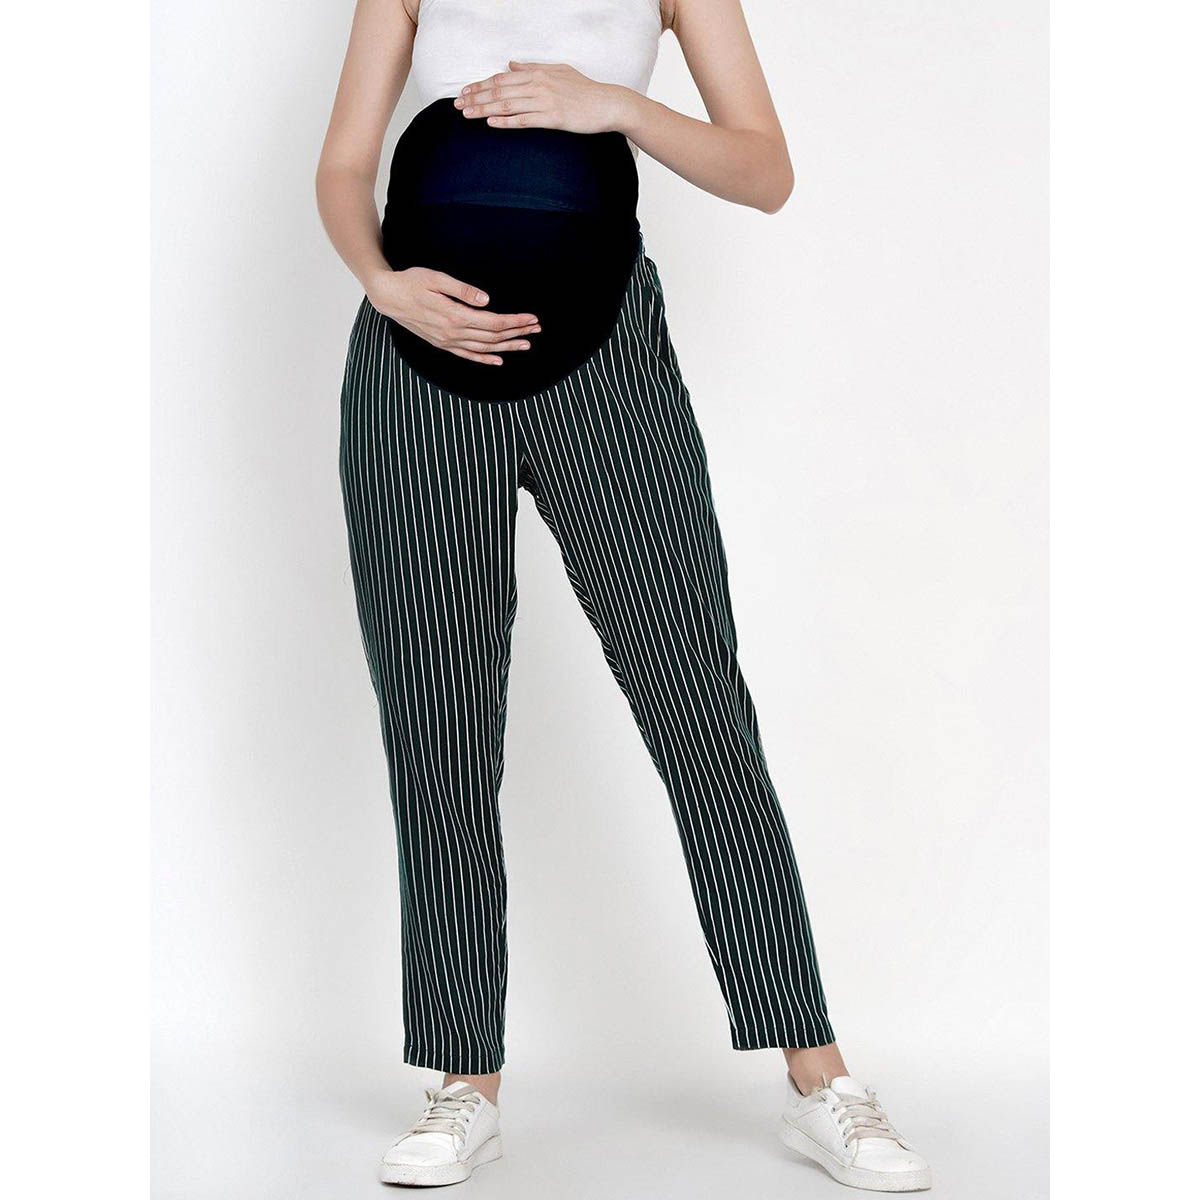 Pregnancy Office Pants Elastic Waist Maternity Black Work Trousers Pregnant  Women Formal Business Wear Clothes Color: Black Straight Leg, Maternity  Size: XL | Uquid shopping cart: Online shopping with crypto currencies